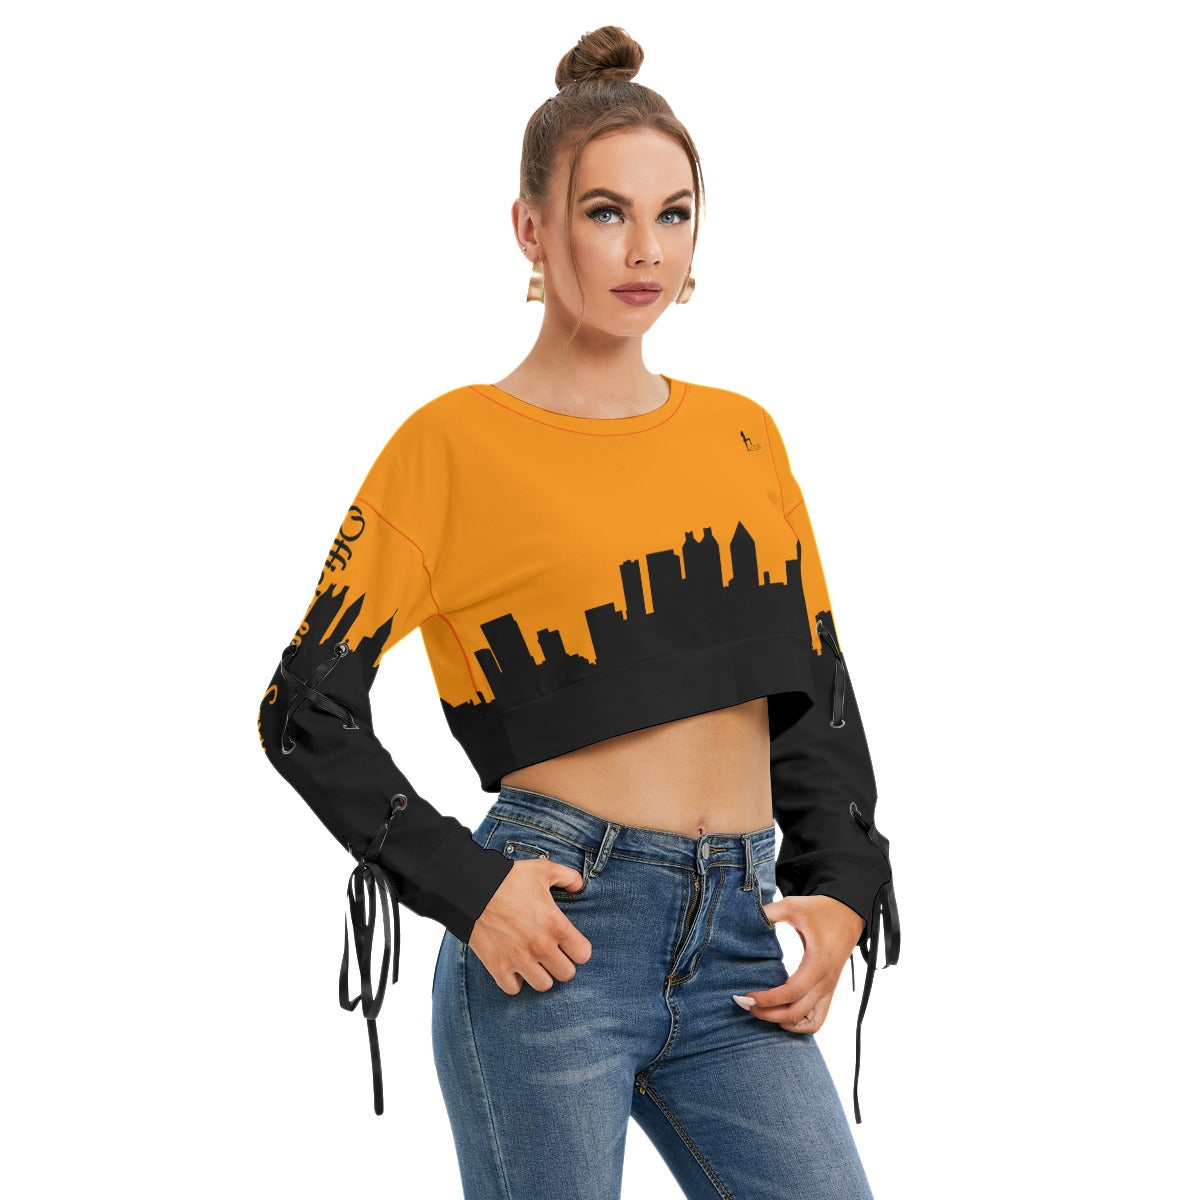 Officially Sexy Neon Orange & Black Skyline Collection Women's Long Lace up Sleeve Cropped Sweatshirt